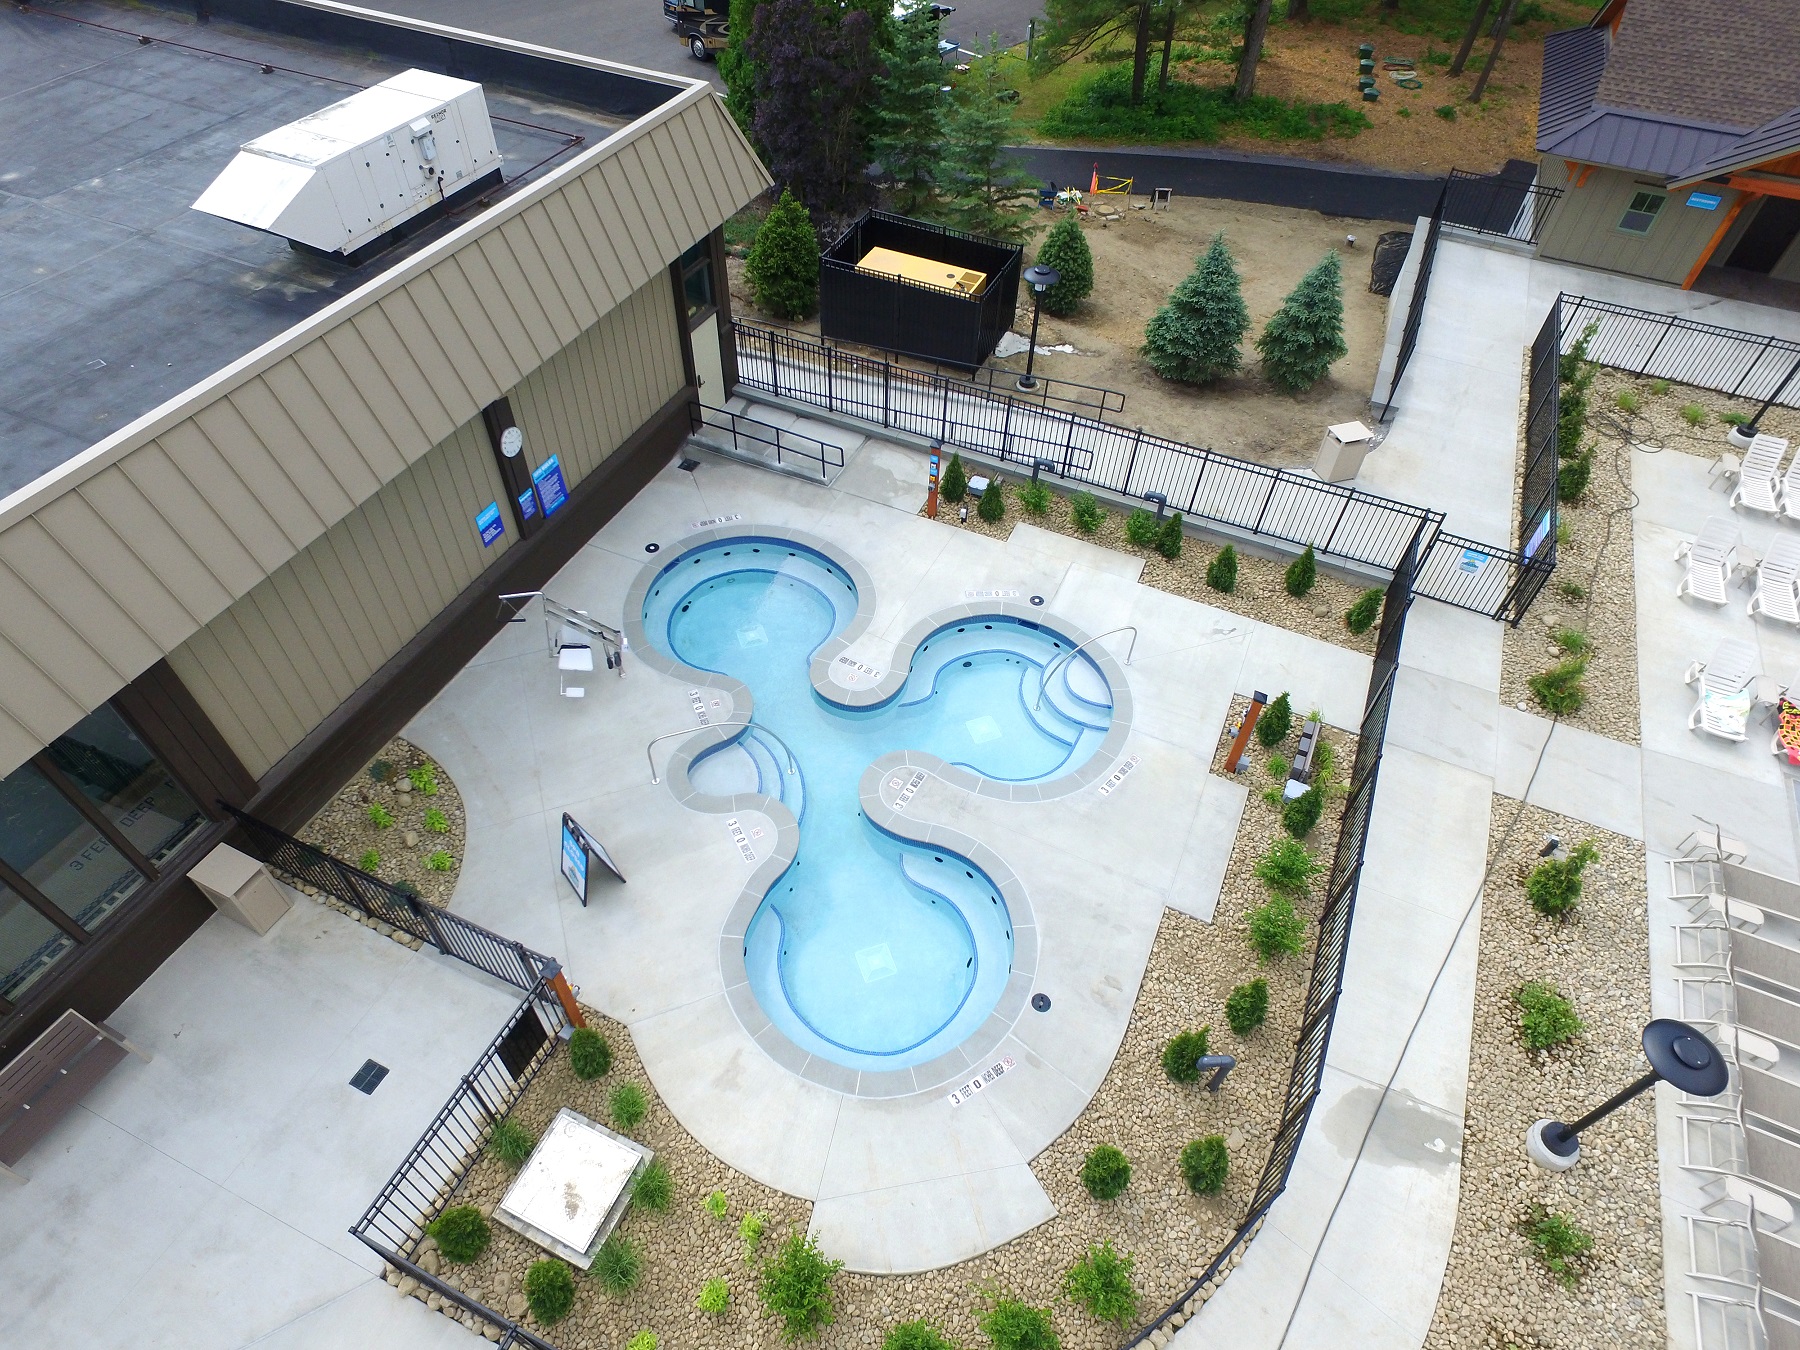 A birds eye view of Cascade Cove's hot tub area. 3 tubs are shown surrounded by a landscape area.